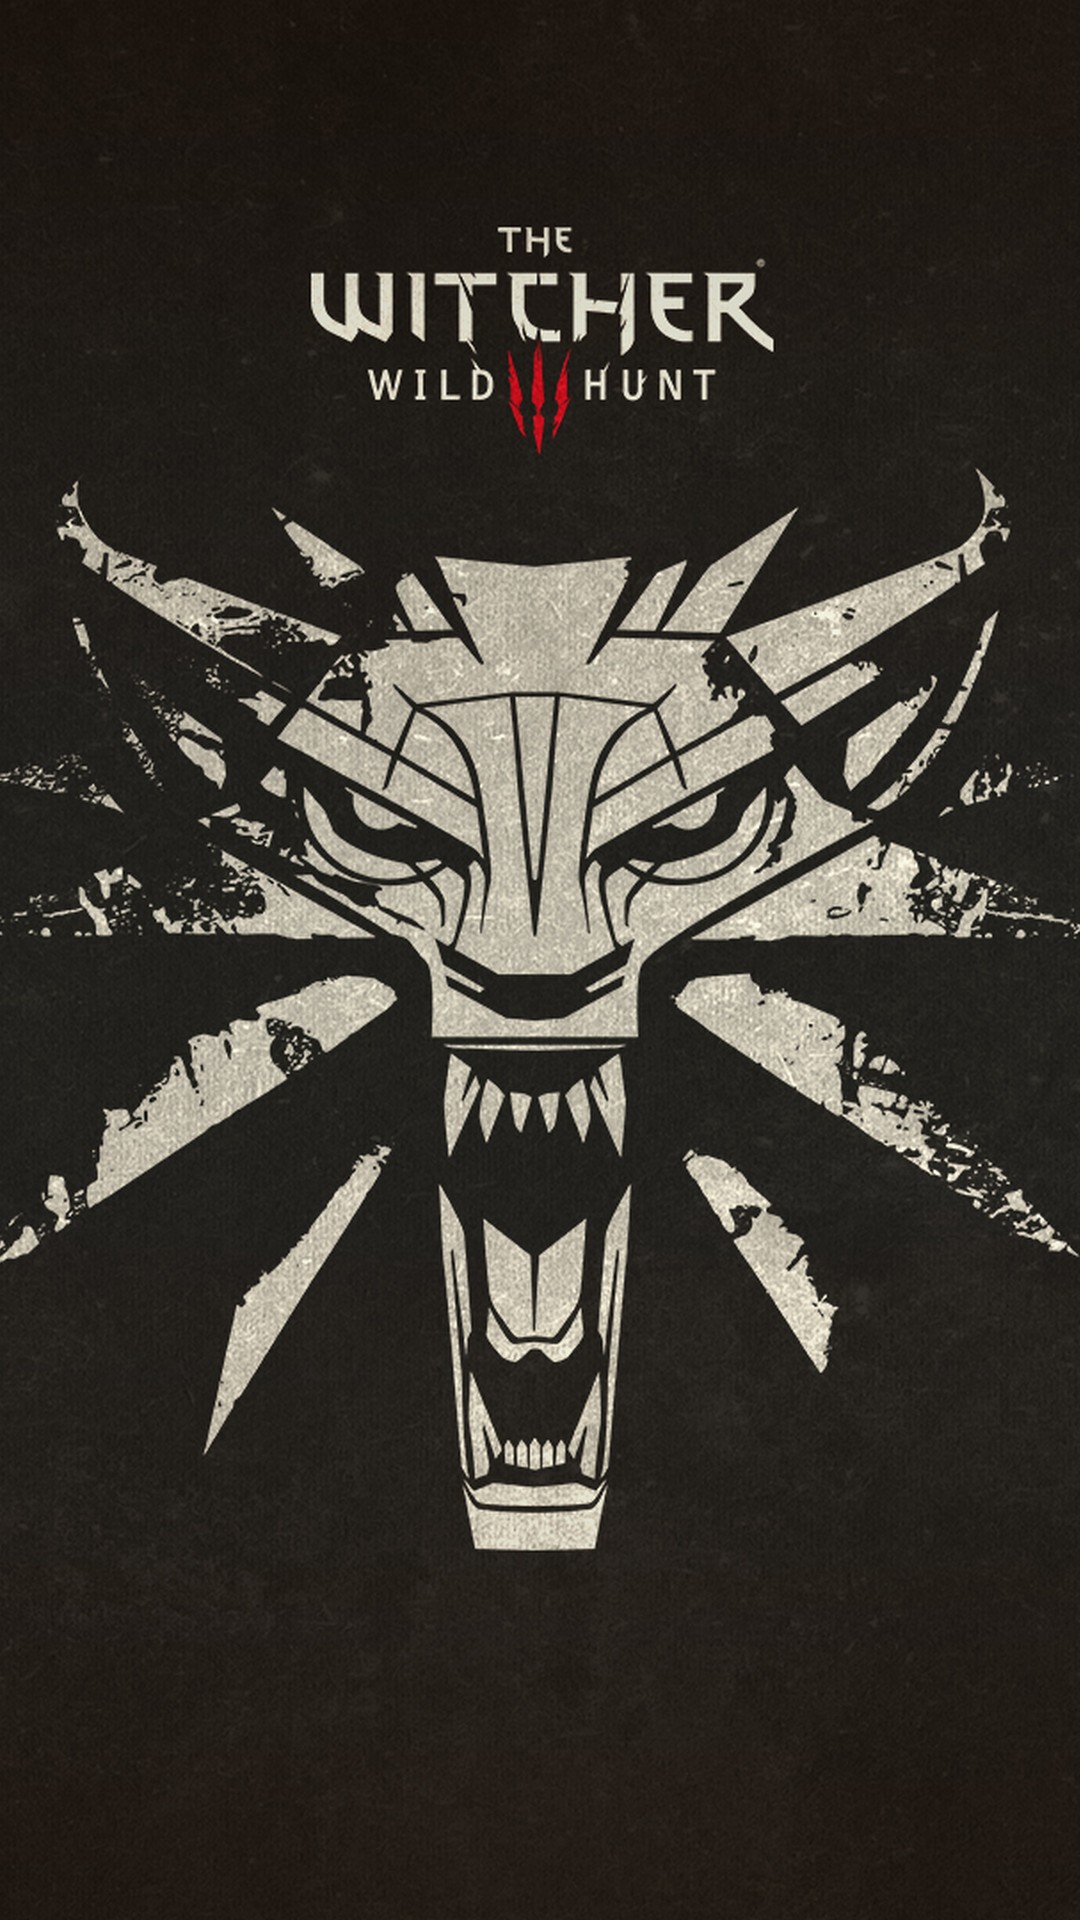 The Witcher Wallpaper For Android with high-resolution 1080x1920 pixel. You can use this wallpaper for your Android backgrounds, Tablet, Samsung Screensavers, Mobile Phone Lock Screen and another Smartphones device